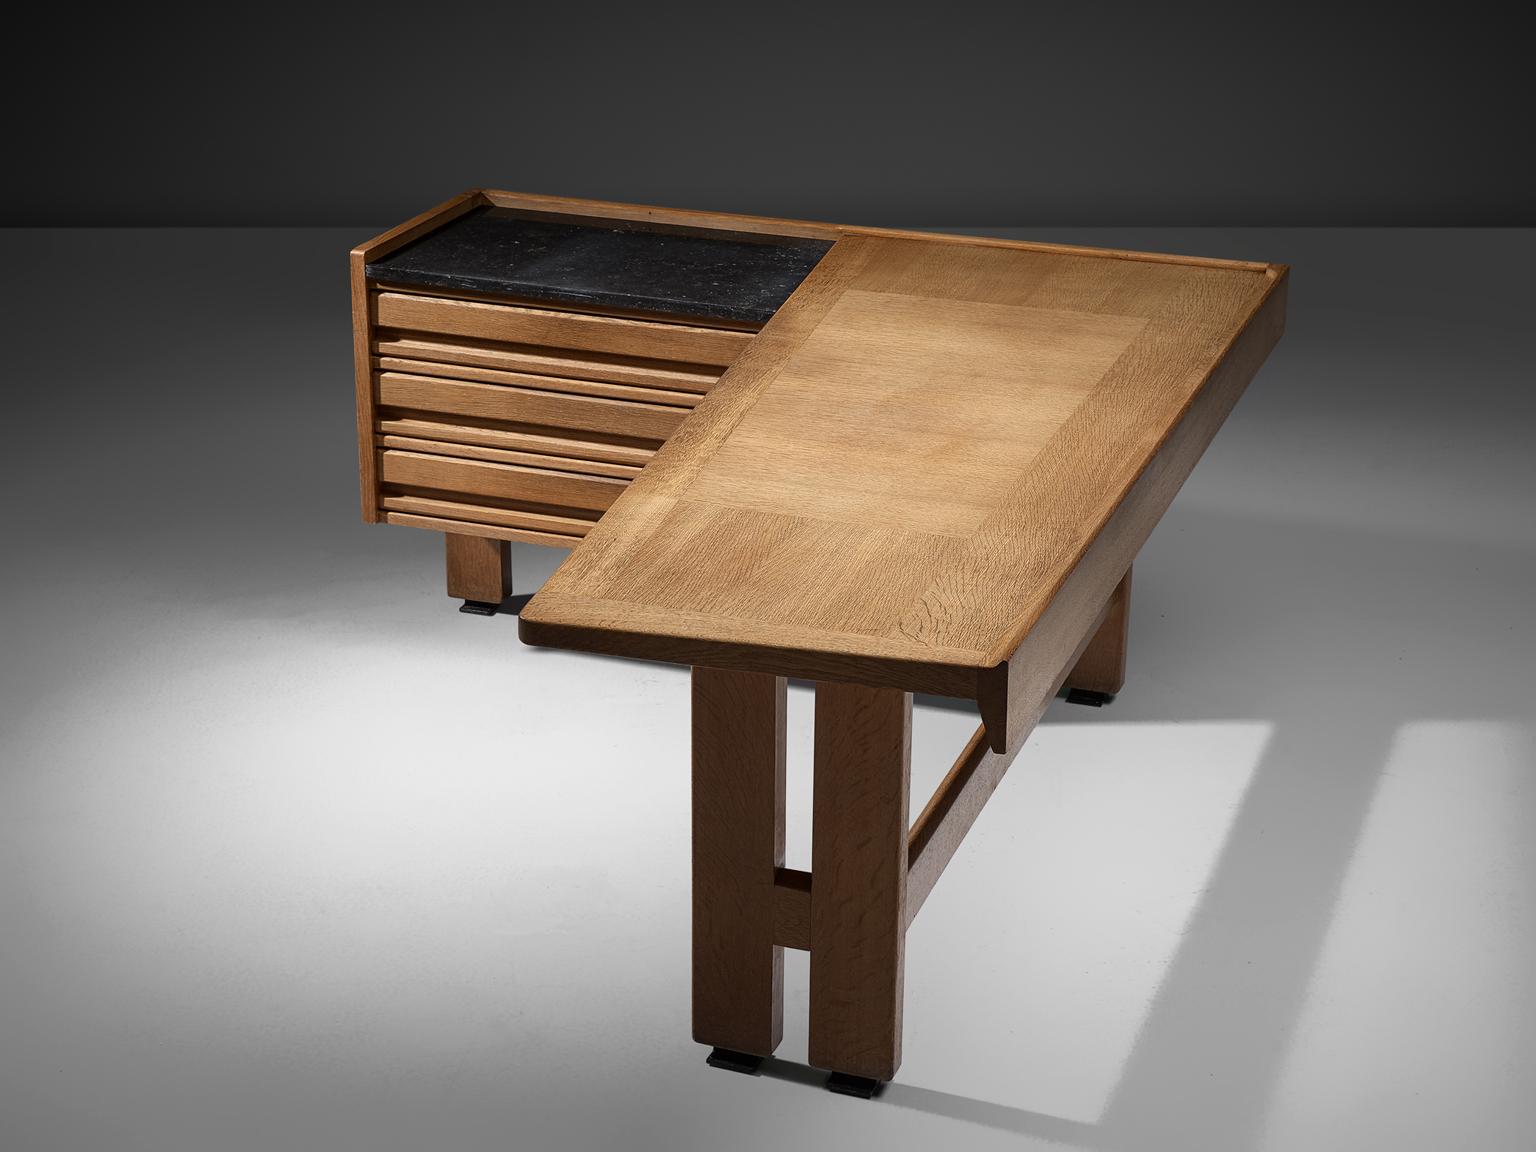 Guillerme et Chambron, desk, oak and granite, by France, 1960s. 

Corner desk by French designer duo Guillerme and Chambron. This executive desk holds the characteristic decorations and lines of this designer duo. The top is inlaid with wood in